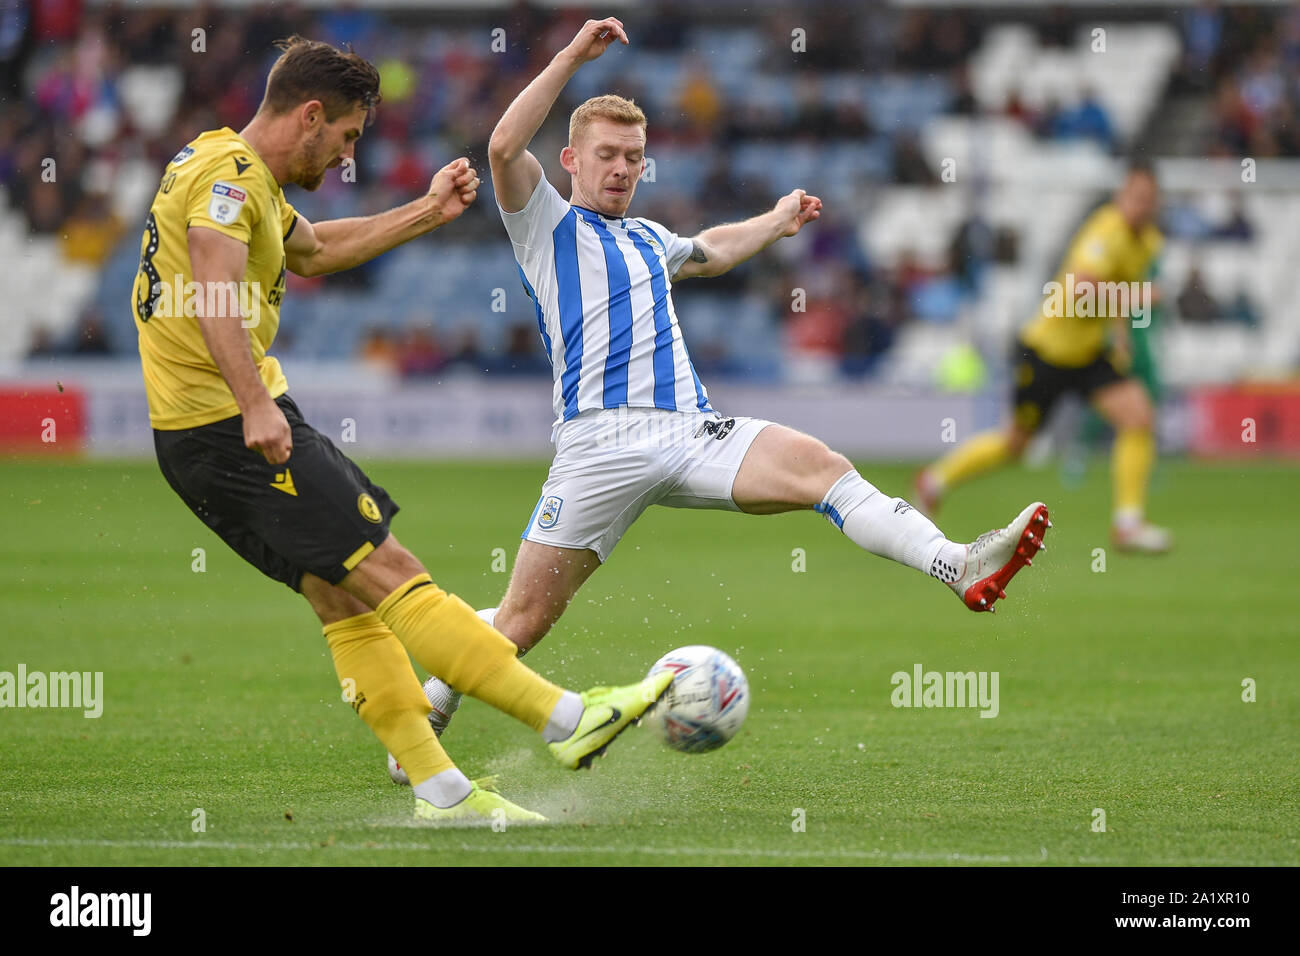 28th September 2019, John Smith's Stadium, Huddersfield, England; Sky Bet Championship, Huddersfield Town v Millwall :Lewis O'Brien (39) of Huddersfield Town chases down a clearance. Credit: Dean Williams/News Images Stock Photo